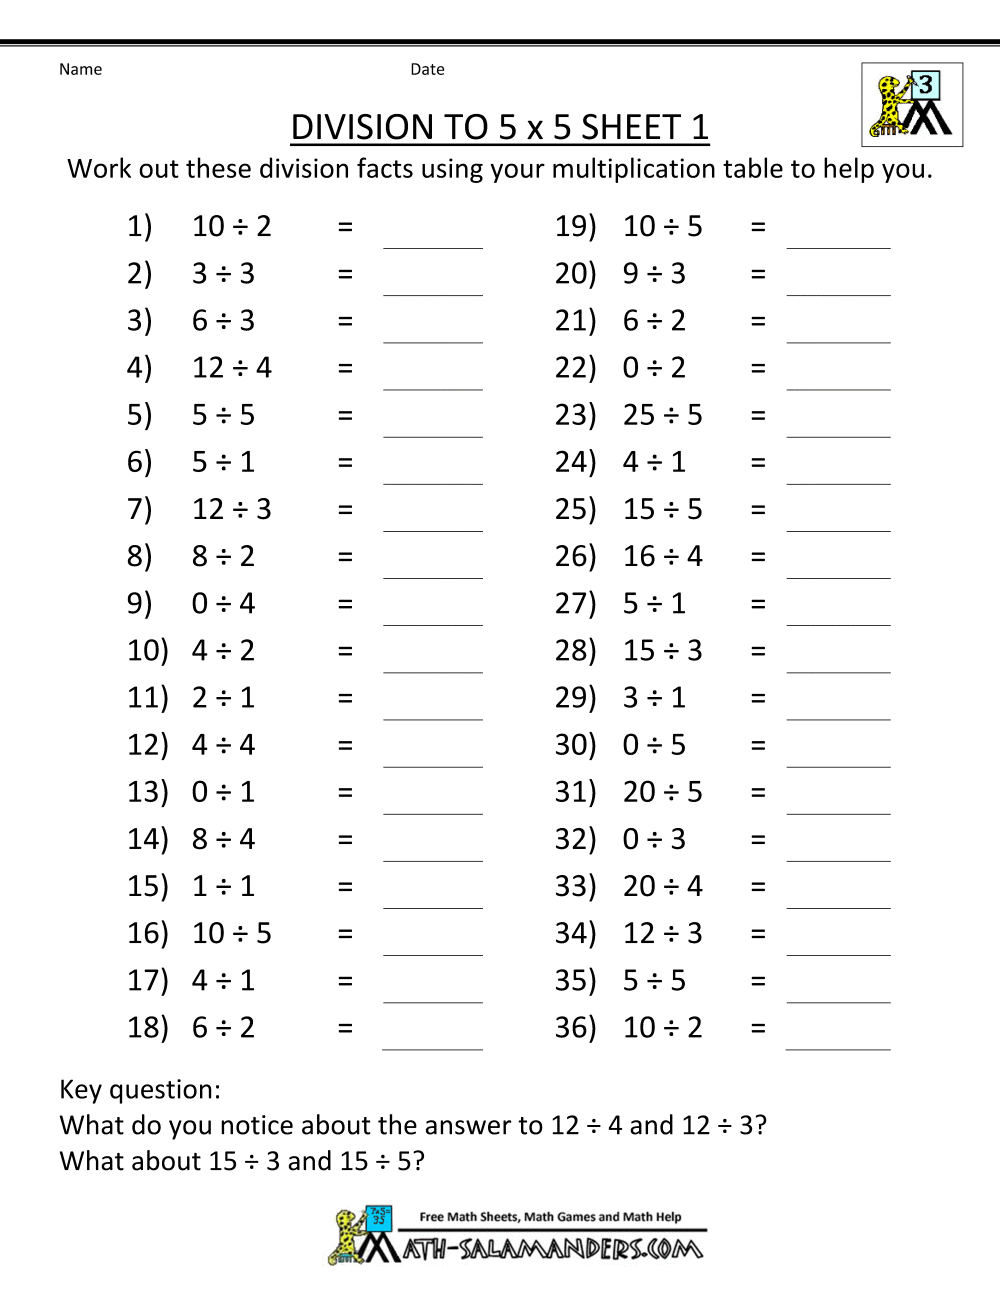 christmas-fraction-worksheets-5th-grade-search-results-calendar-2015